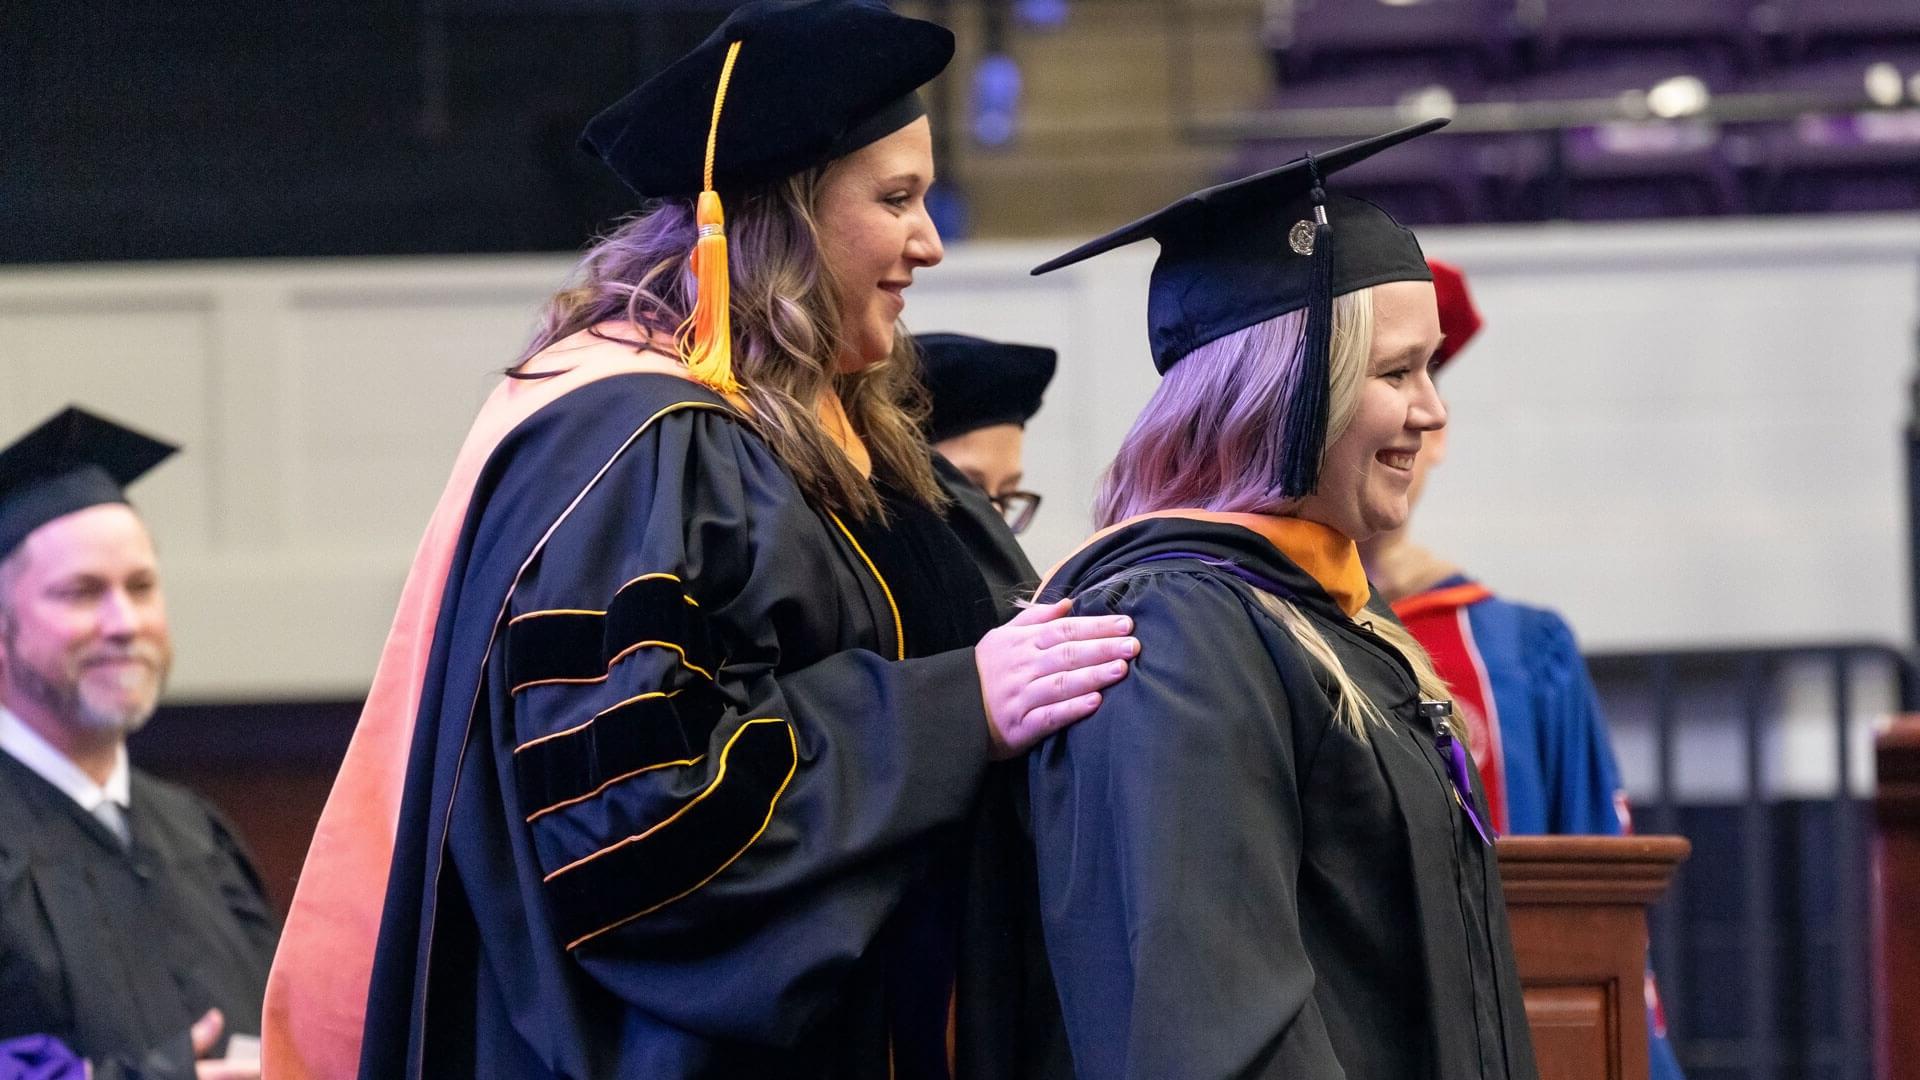 nursing graduate receives master's hood from professor during commencement ceremony